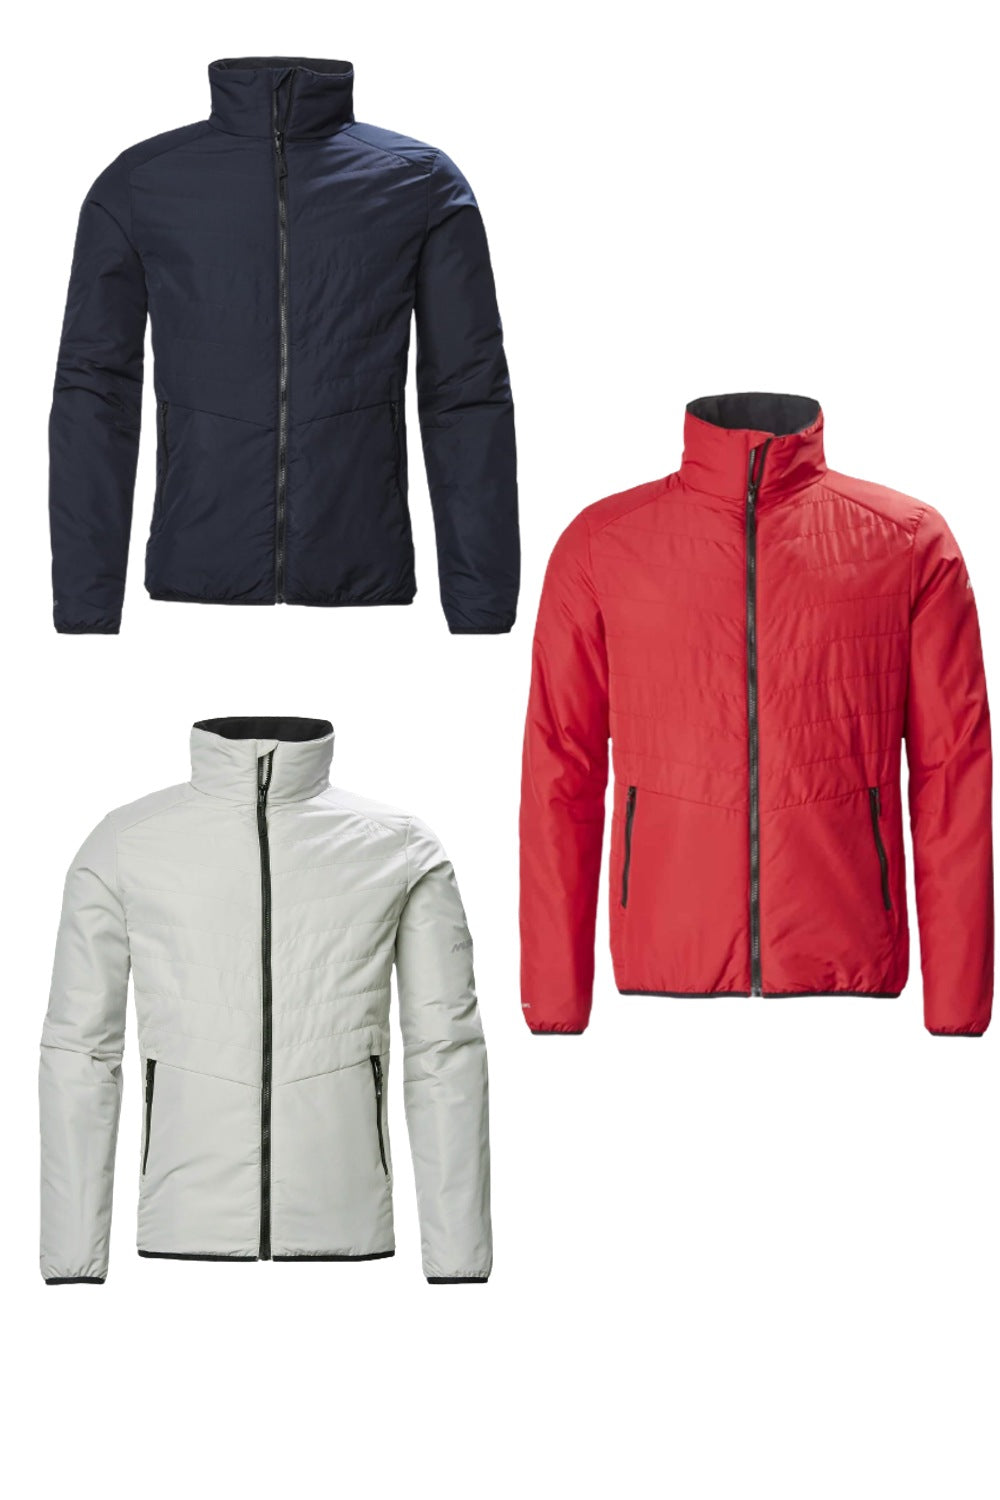 Musto Corsica Primaloft Funnel Jacket in Navy, True Red and Platinum